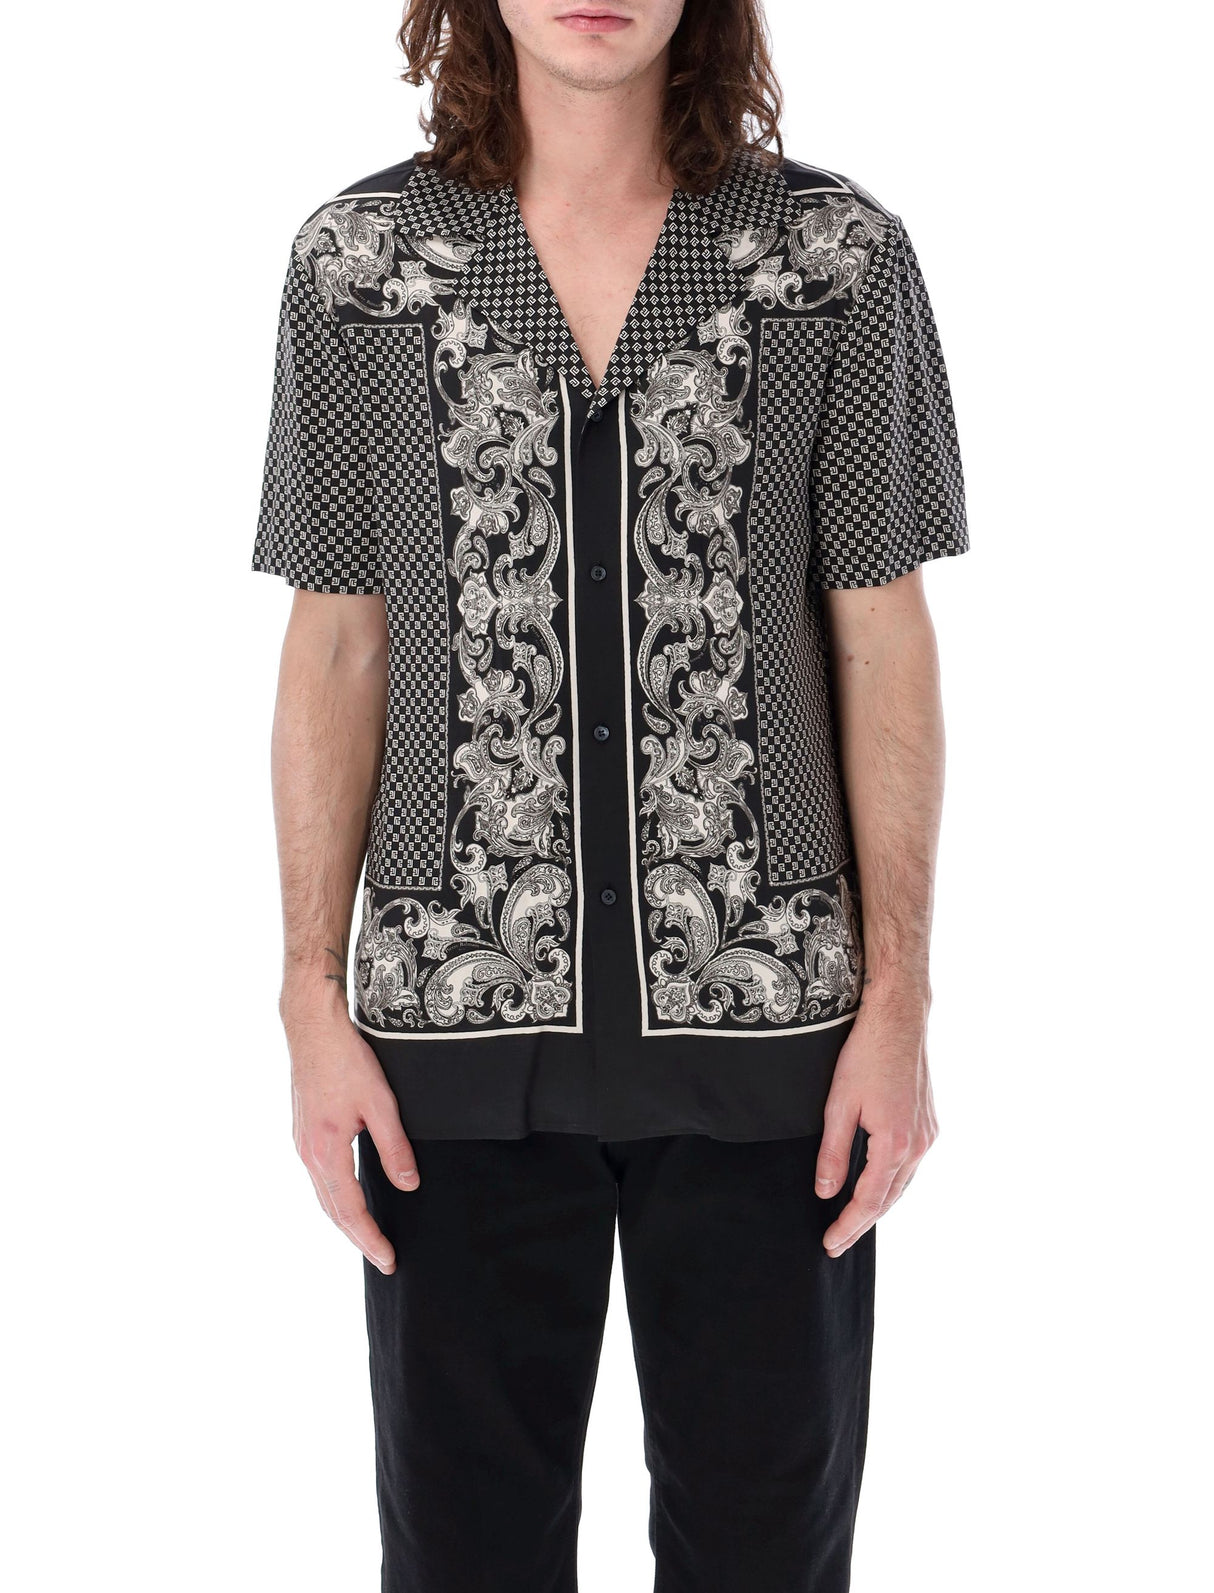 Paisley and Monogram Bowling Shirt for Men in Black and White